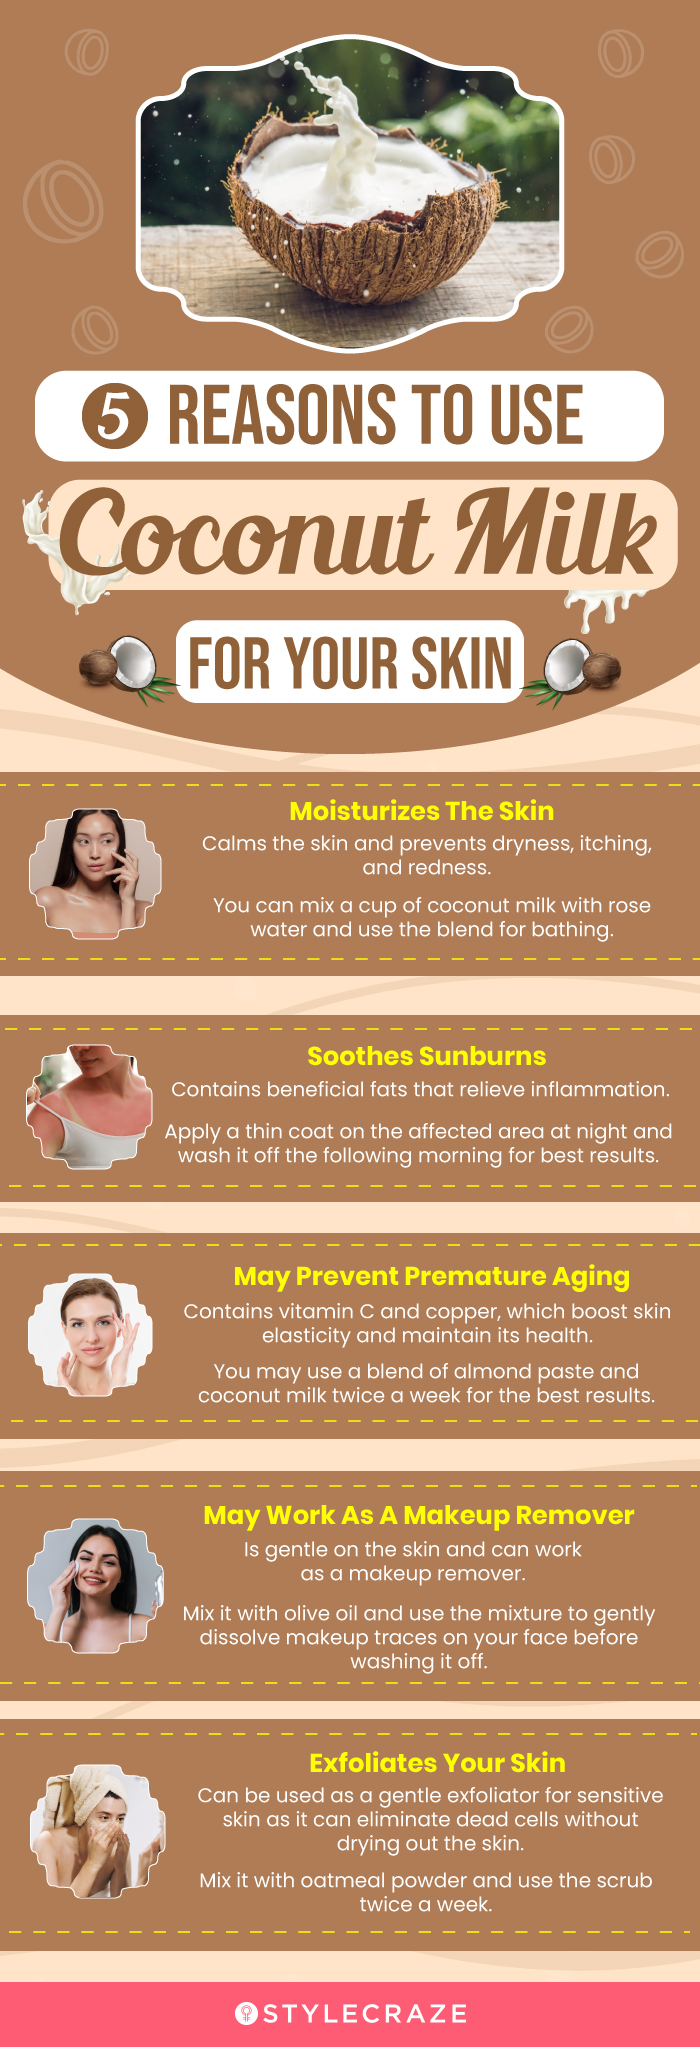 5 reasons to use coconut milk for your skin [infographic]